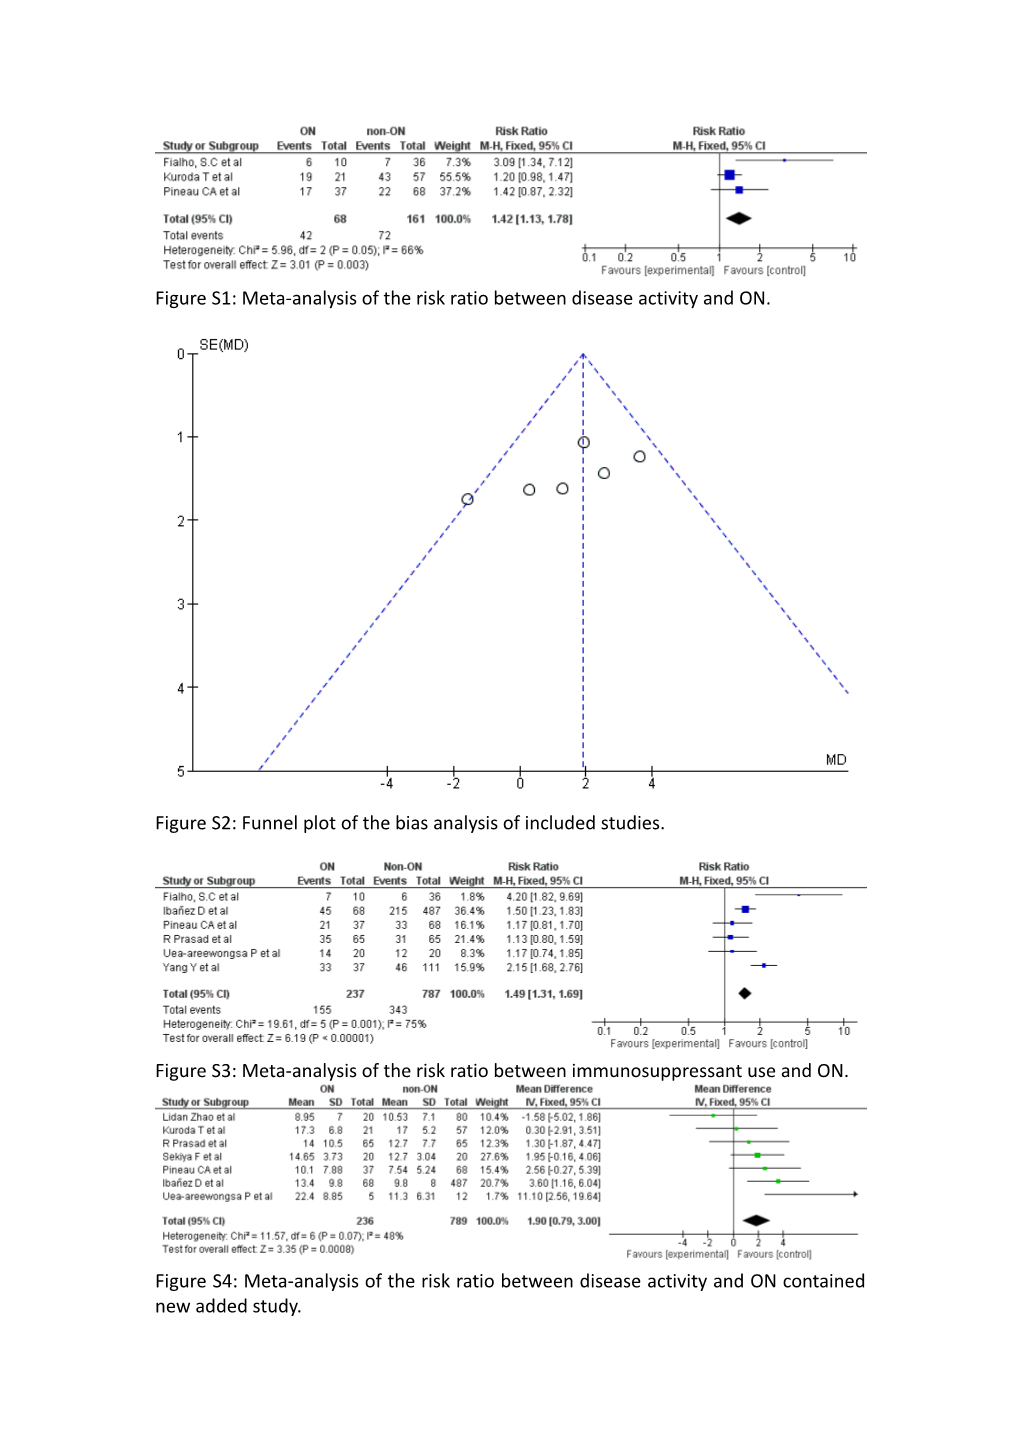 Figure S1: Meta-Analysis of the Risk Ratio Between Disease Activity and ON